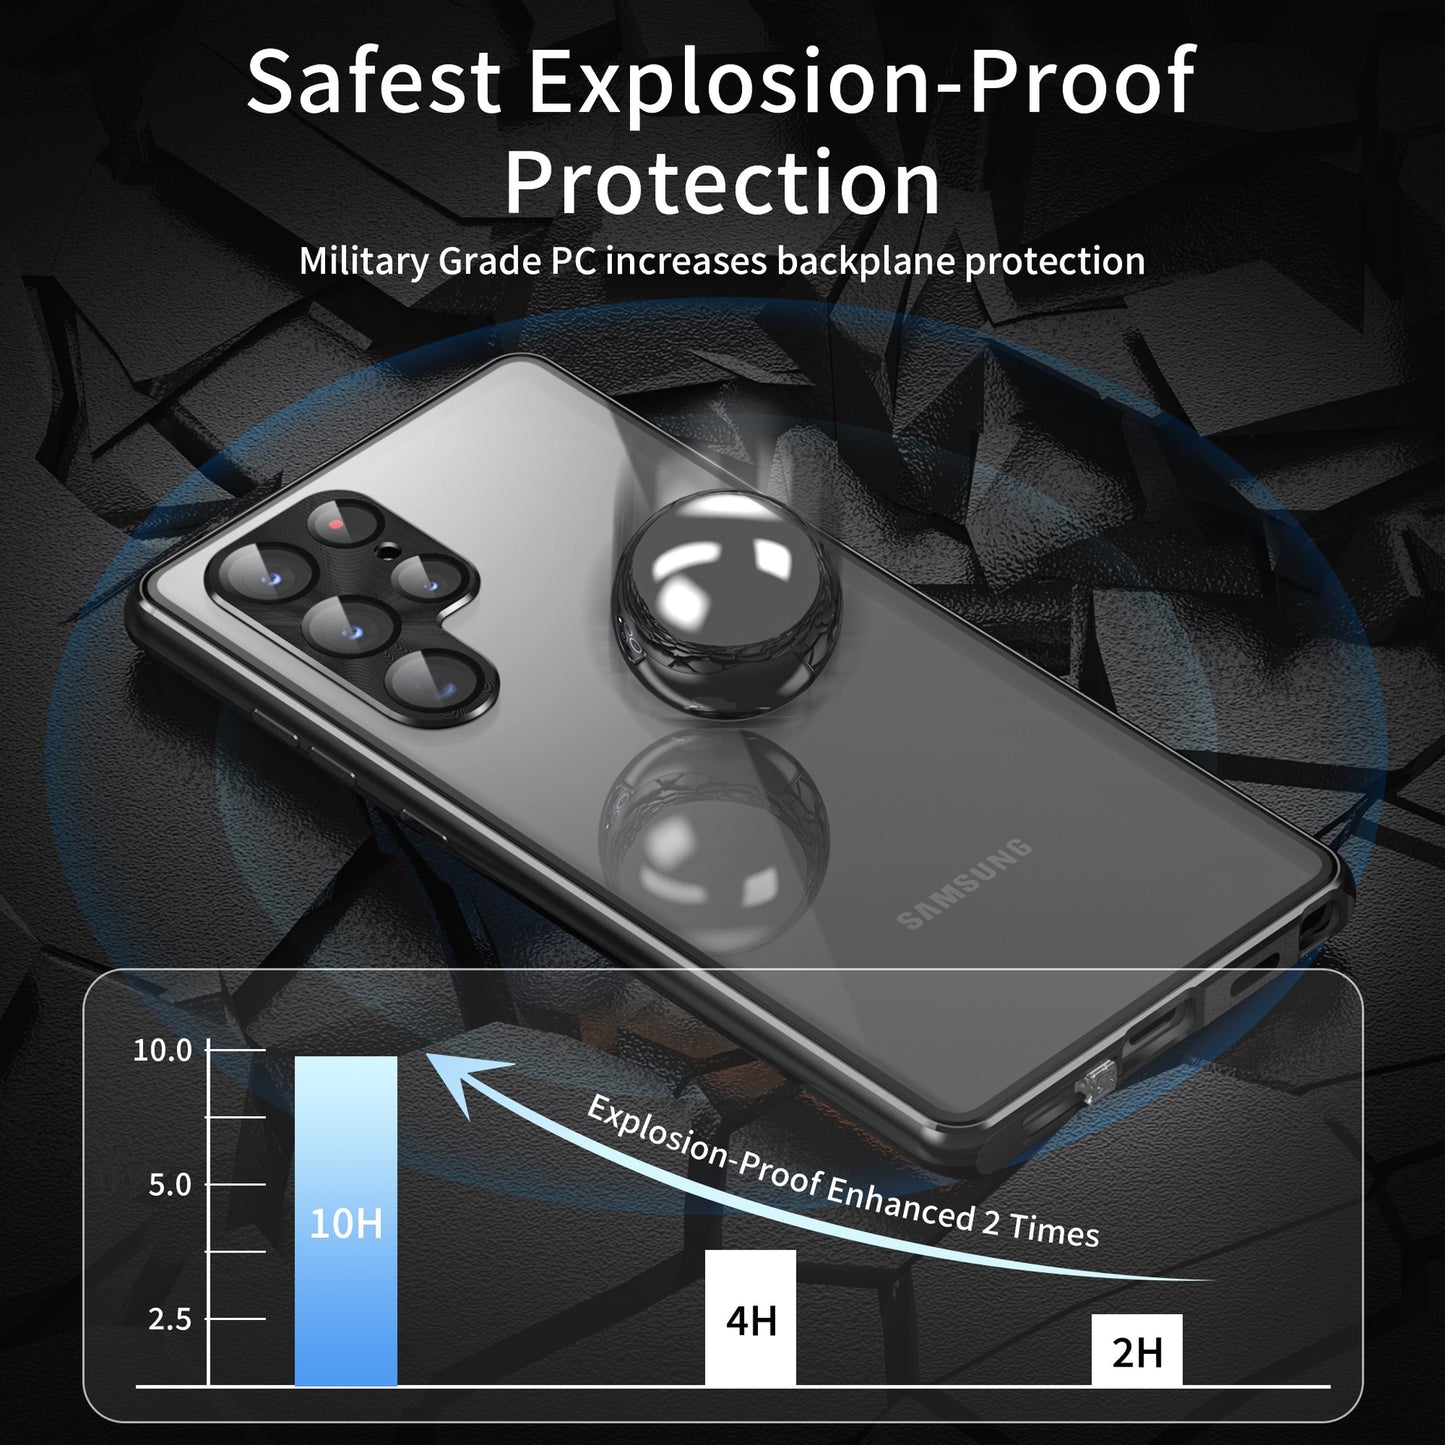 Metal Magnetic for Samsung Galaxy S23 Ultra Case with 360° Fully sealed Privacy screen glass HD Camera protection cover